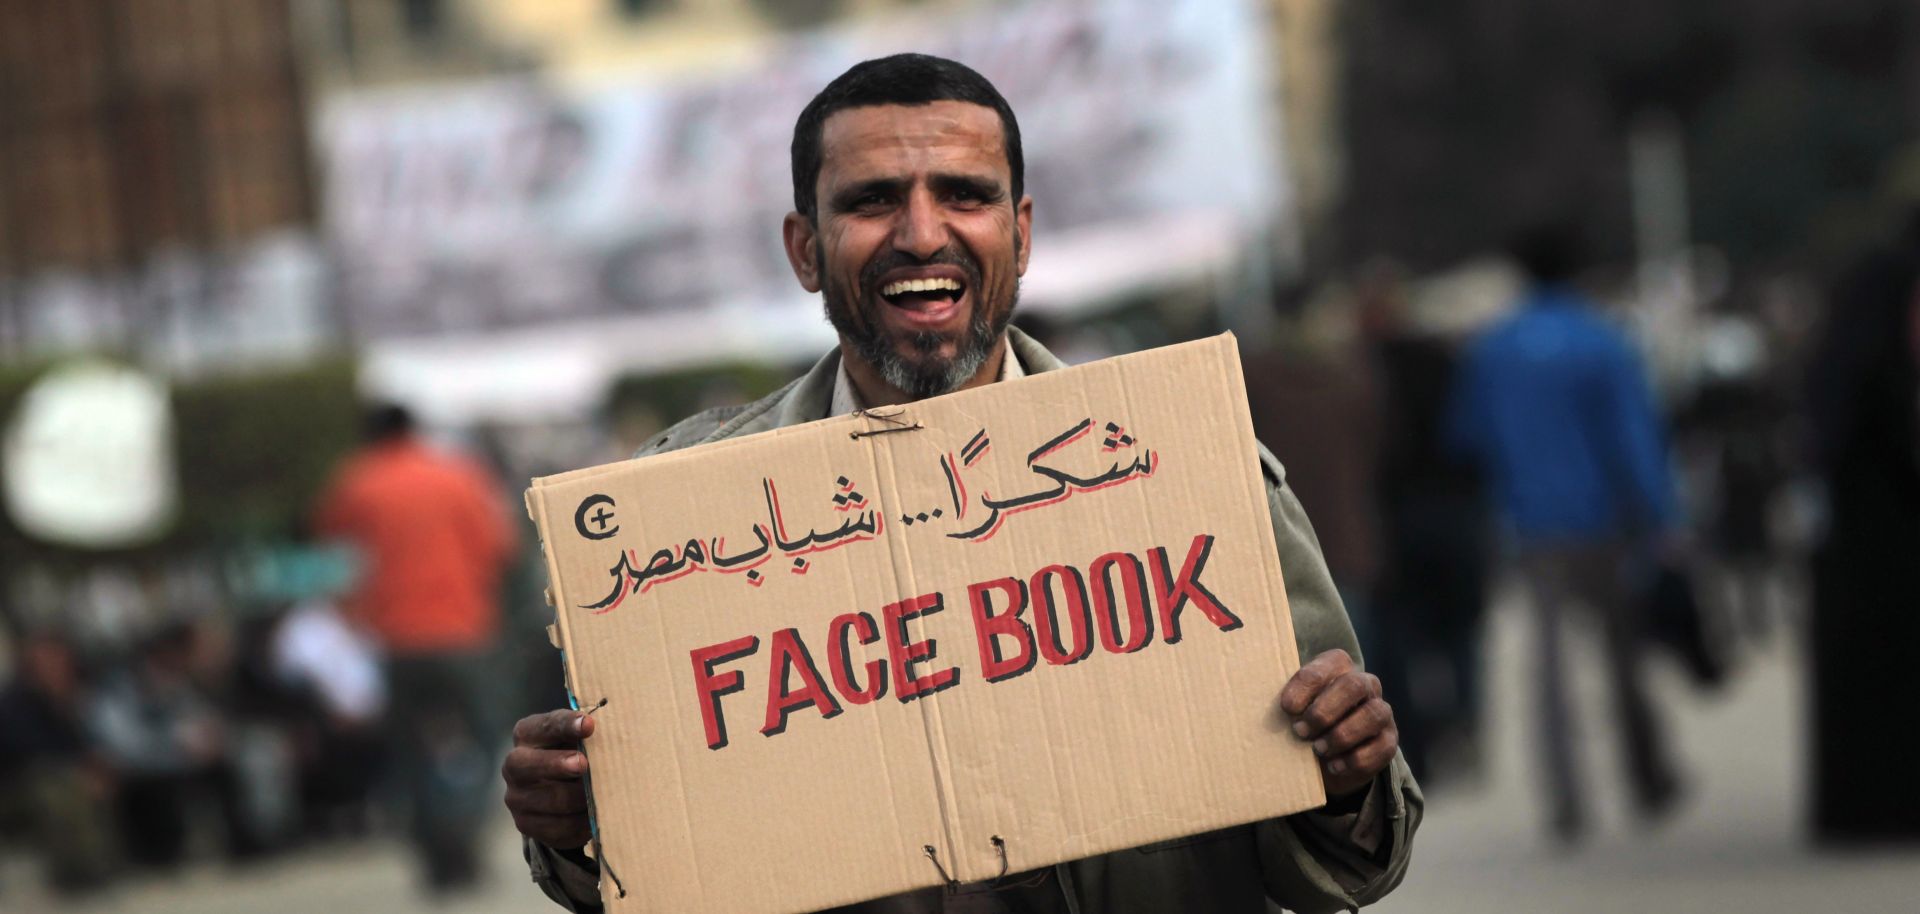 An anti-government demonstrator holds a sign during clashes on February 3, 2011 in Cairo, Egypt.